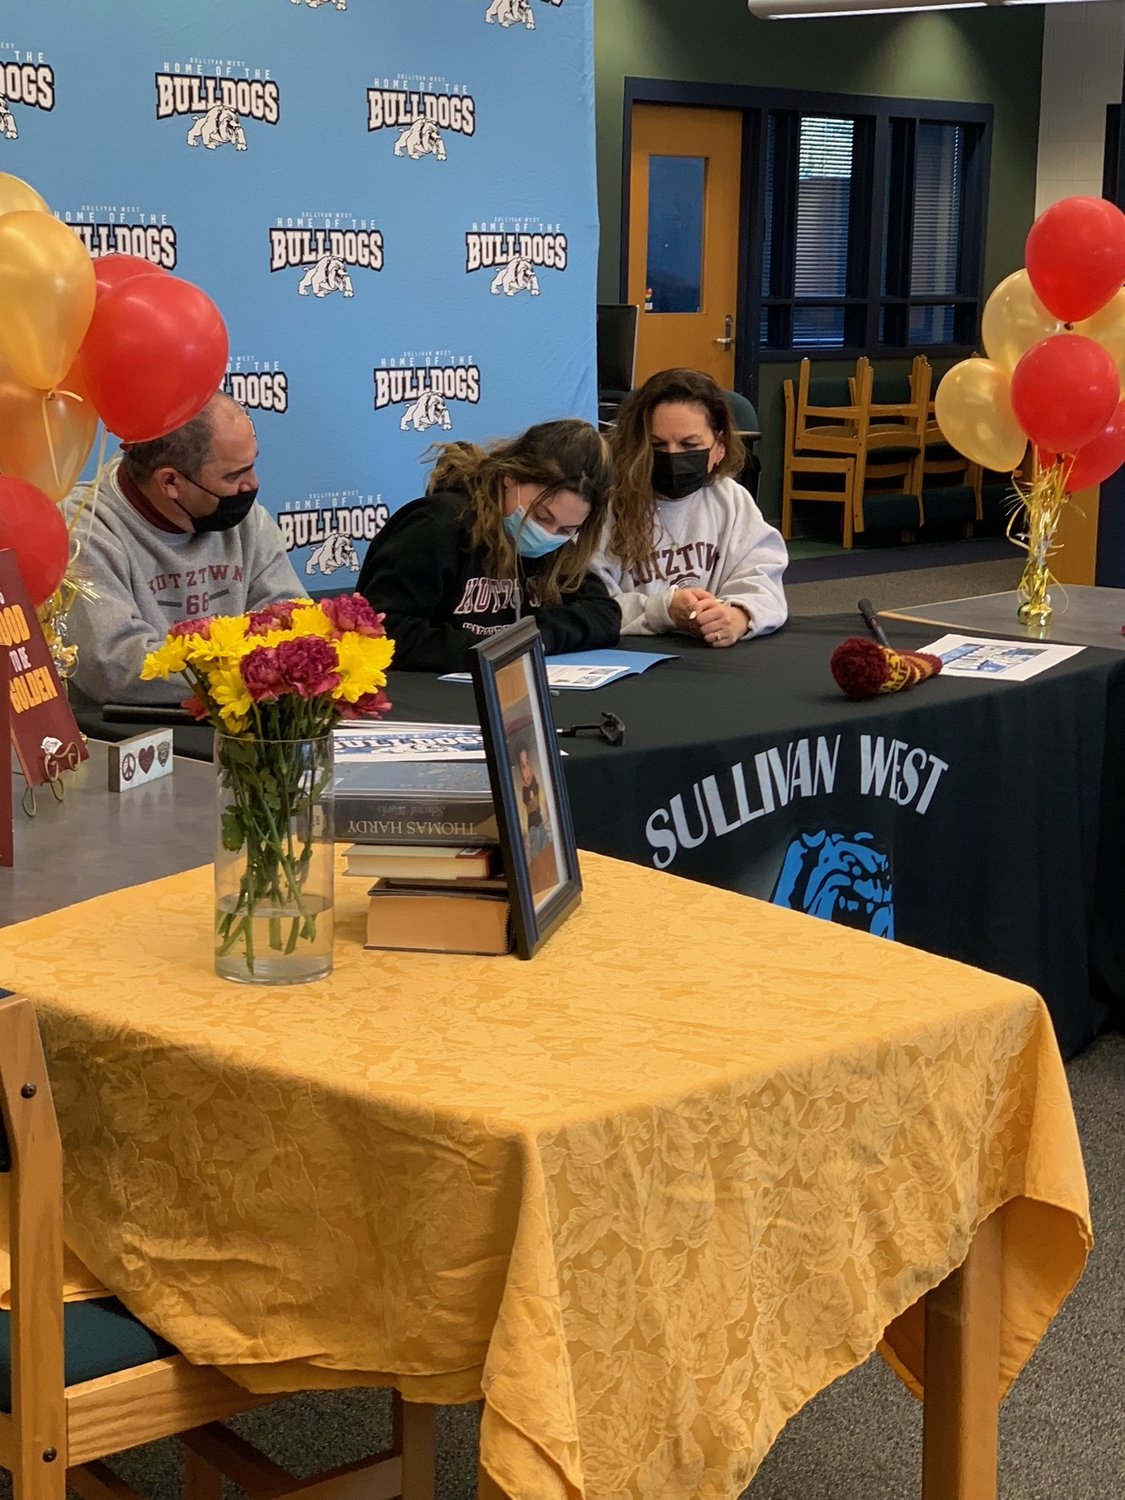 Gabby (middle) is joined by Ken (left) and Tanya Cohen(right) as she signs her letter of intent to play golf for Kutztown University. Sullivan West held an event for Gabby’s signing, in which Kutztown’s golf coach was able to join remotely.